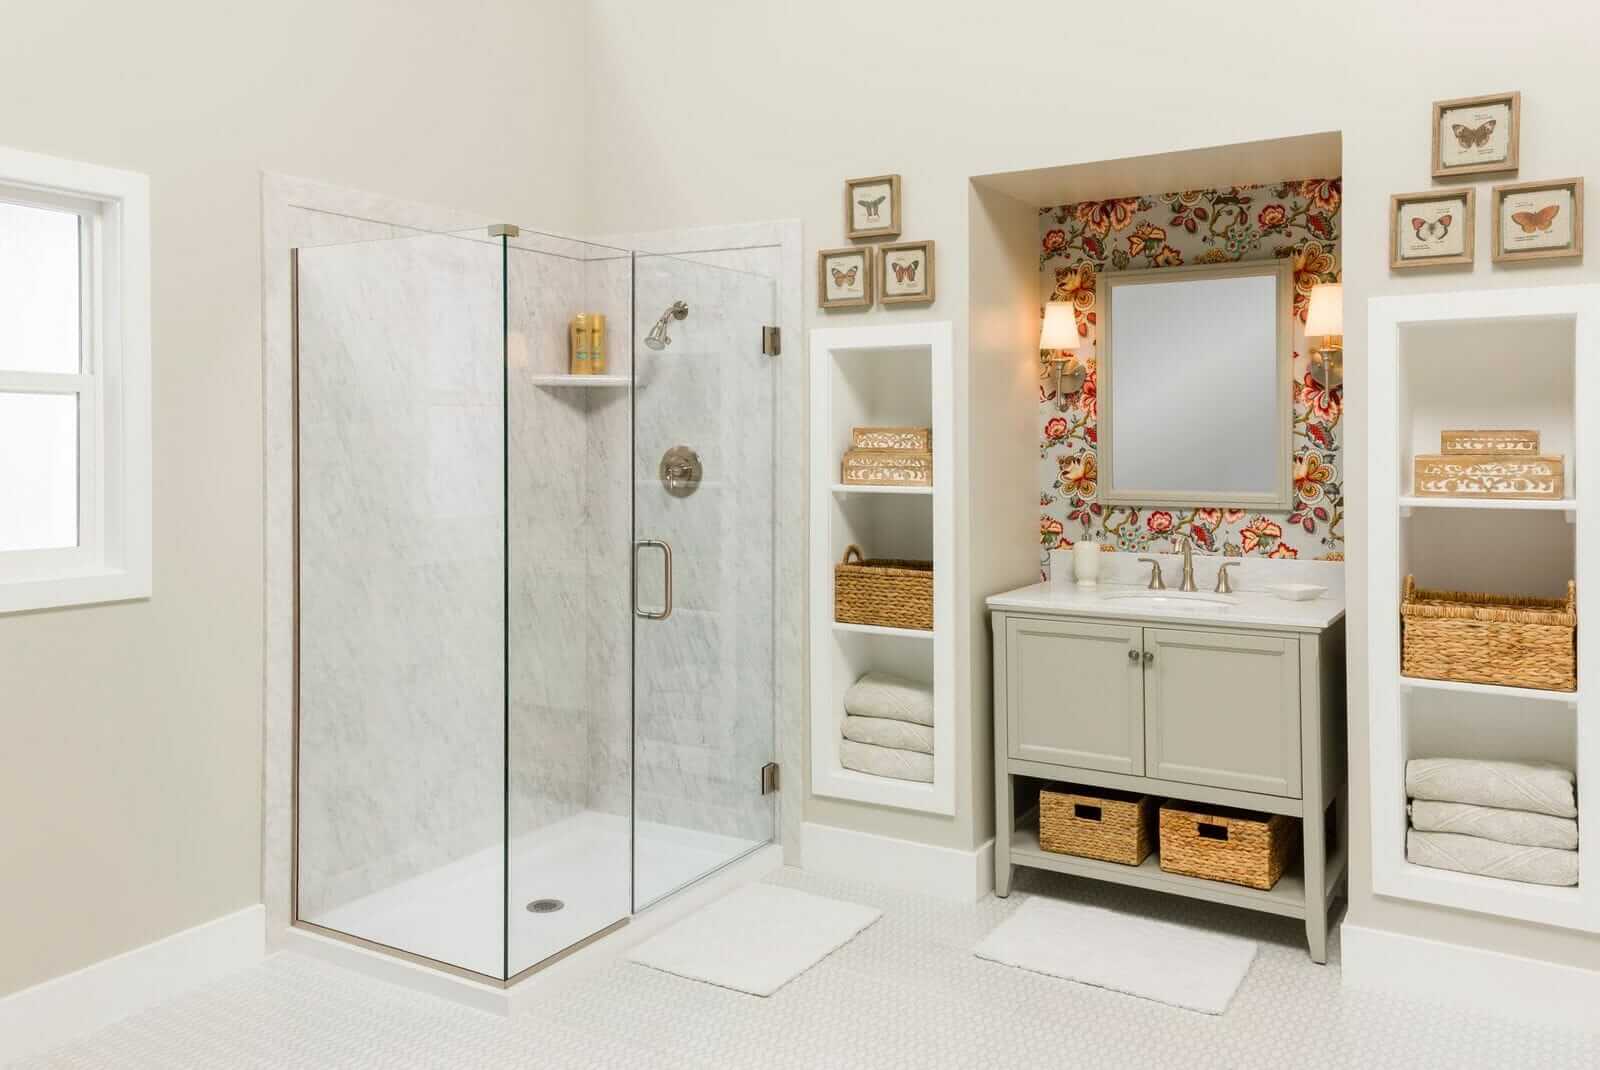 Five Star Bath Solutions of Mississauga  - photo